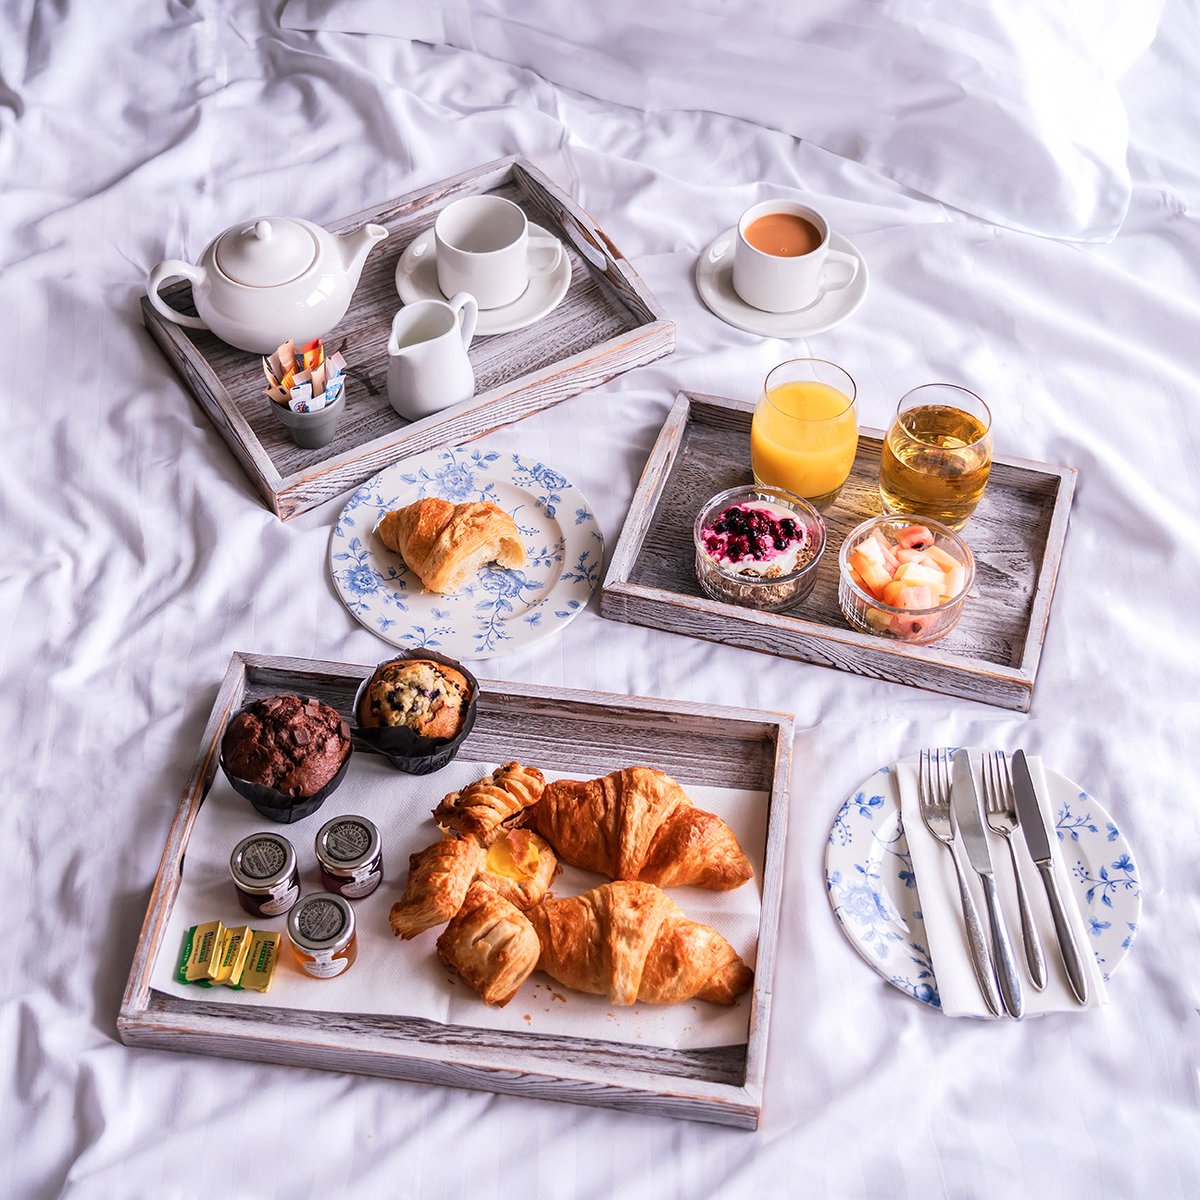 🍳 𝐃𝐑𝐄𝐀𝐌𝐈𝐍𝐆 𝐎𝐅…𝐁𝐑𝐄𝐀𝐊𝐅𝐀𝐒𝐓 𝐈𝐍 𝐁𝐄𝐃🍳 Wish you were here? Yes! Especially with this cold weather, it's time to snuggle up under the duvet. Book your next break with our seasonal stay offer & stay from only £139.00! Find out more - bit.ly/3l3f9nL